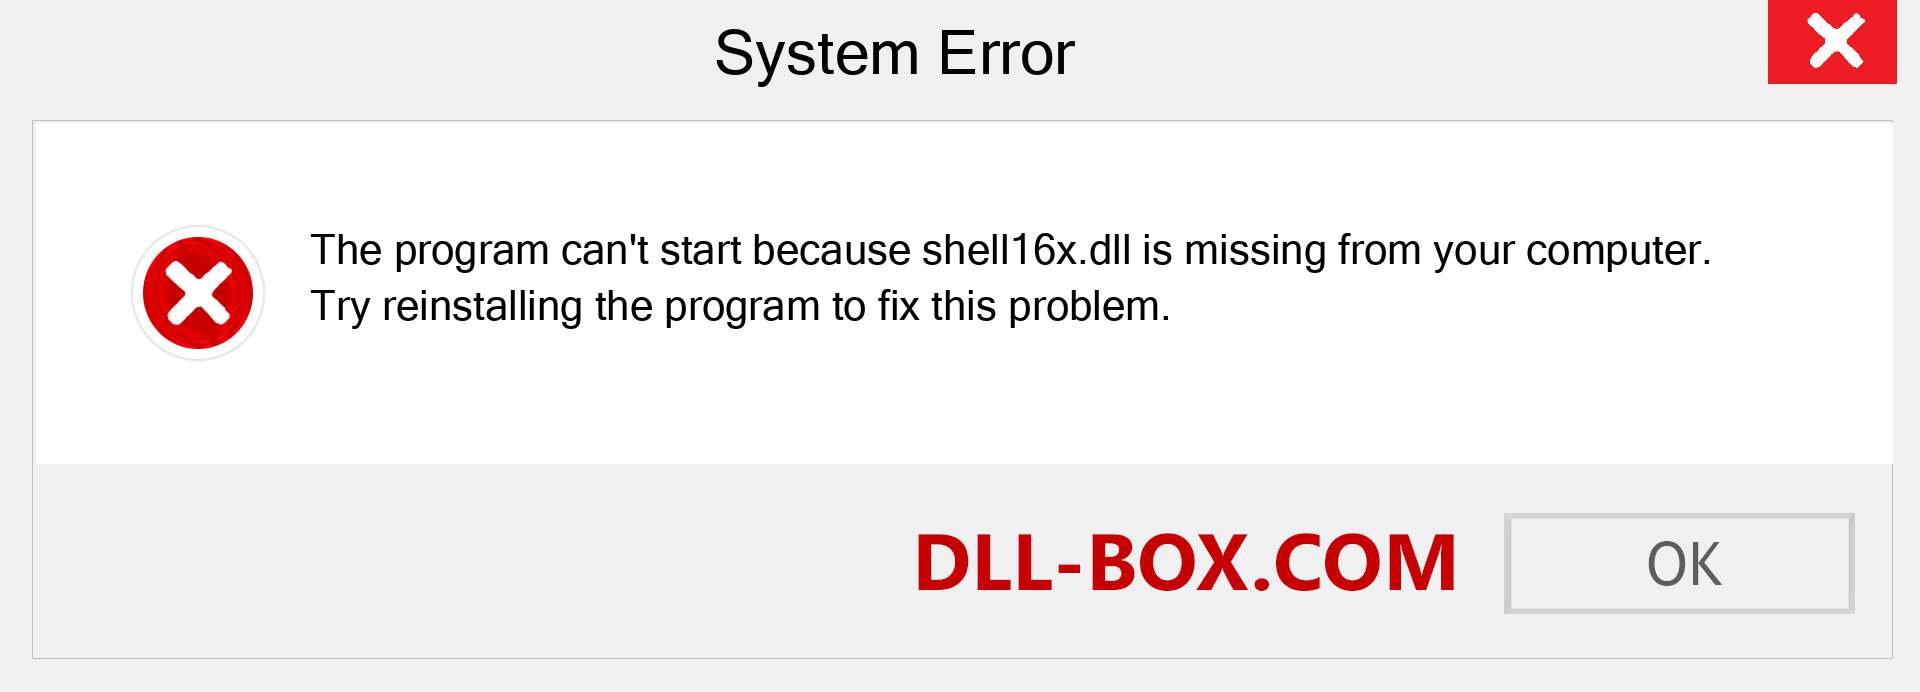  shell16x.dll file is missing?. Download for Windows 7, 8, 10 - Fix  shell16x dll Missing Error on Windows, photos, images